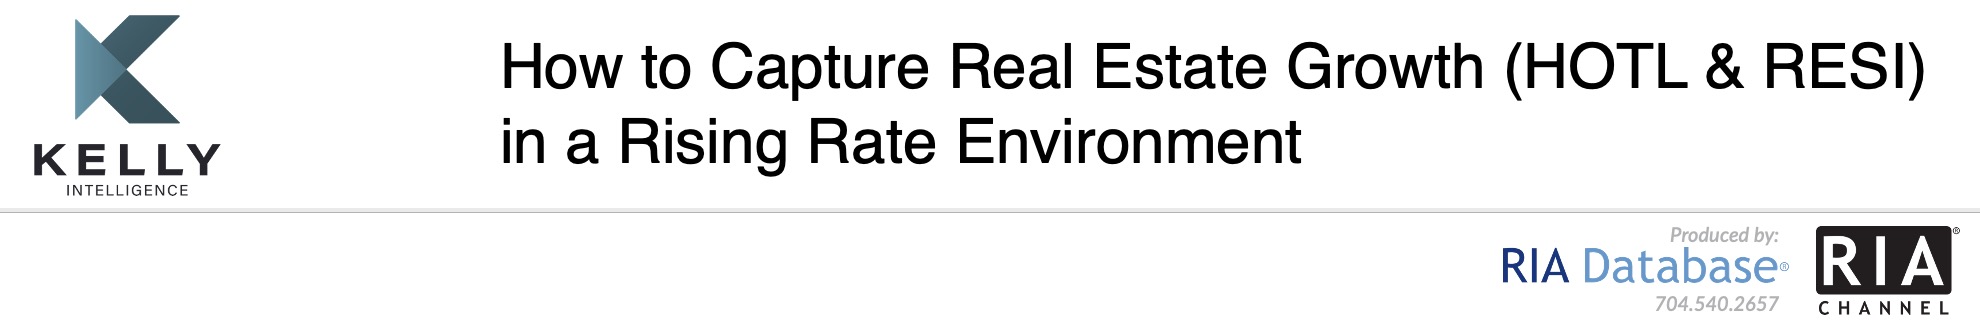 How to Capture Real Estate Growth (HOTL & RESI) in a Rising Rate Environment